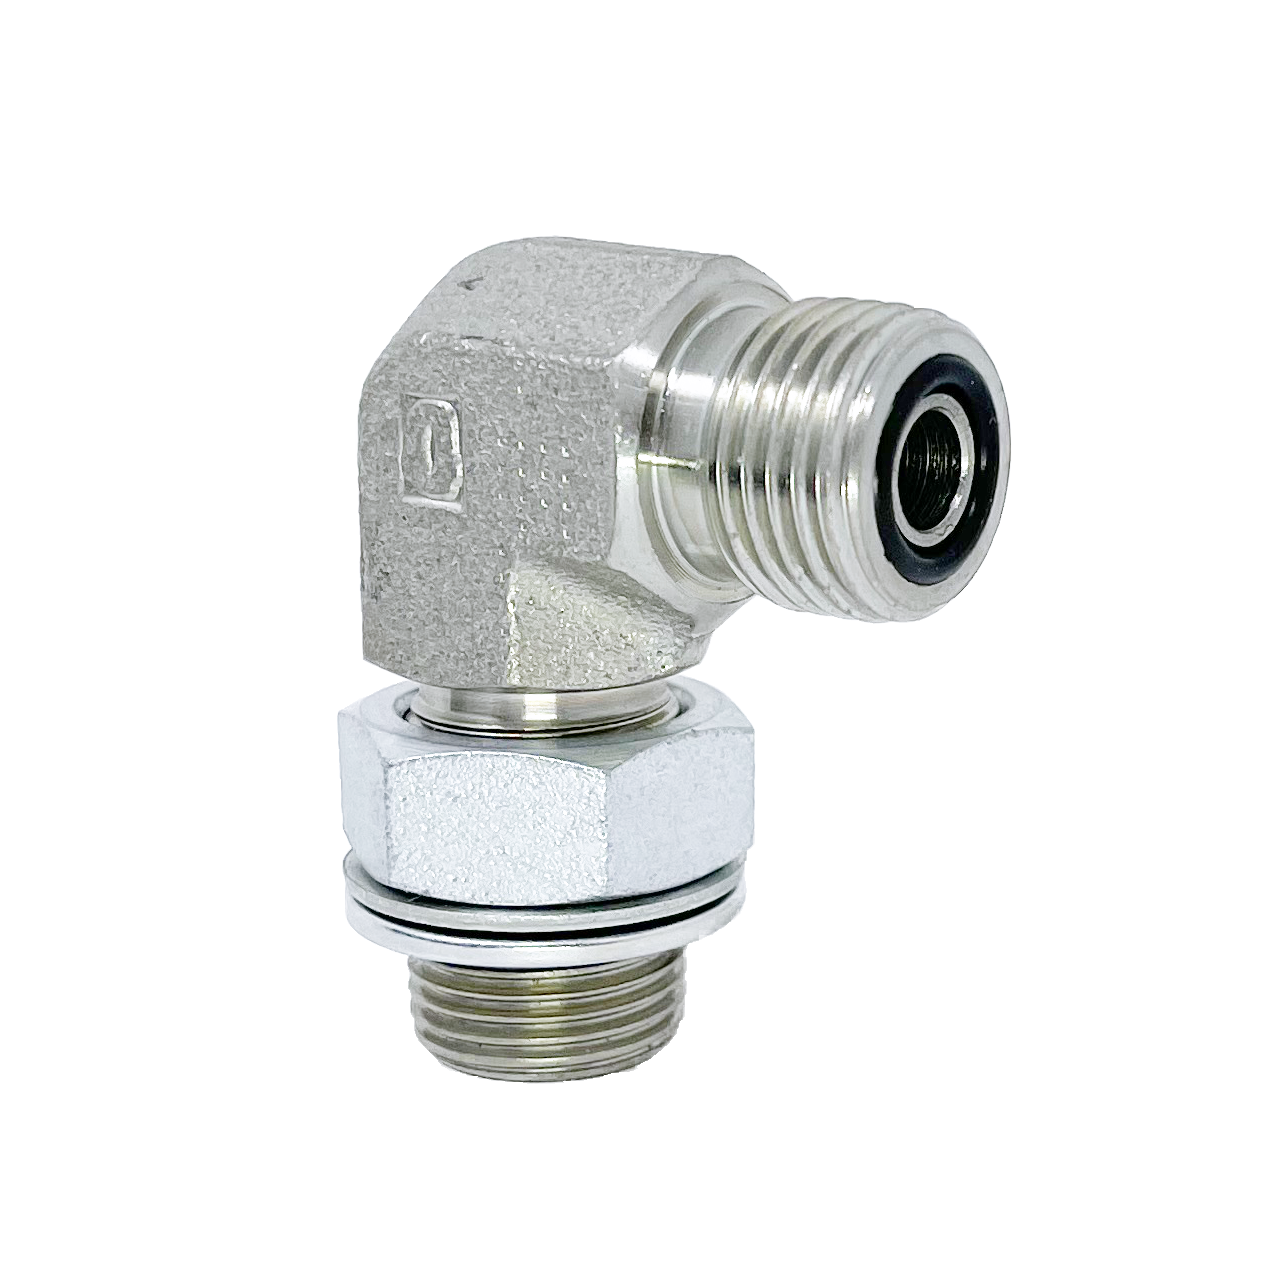 6059-08-08 : Adaptall 90-Degree  Adapter, Male 0.5 (1/2") ORFS x Male 0.5 (1/2") BSPP, Carbon Steel